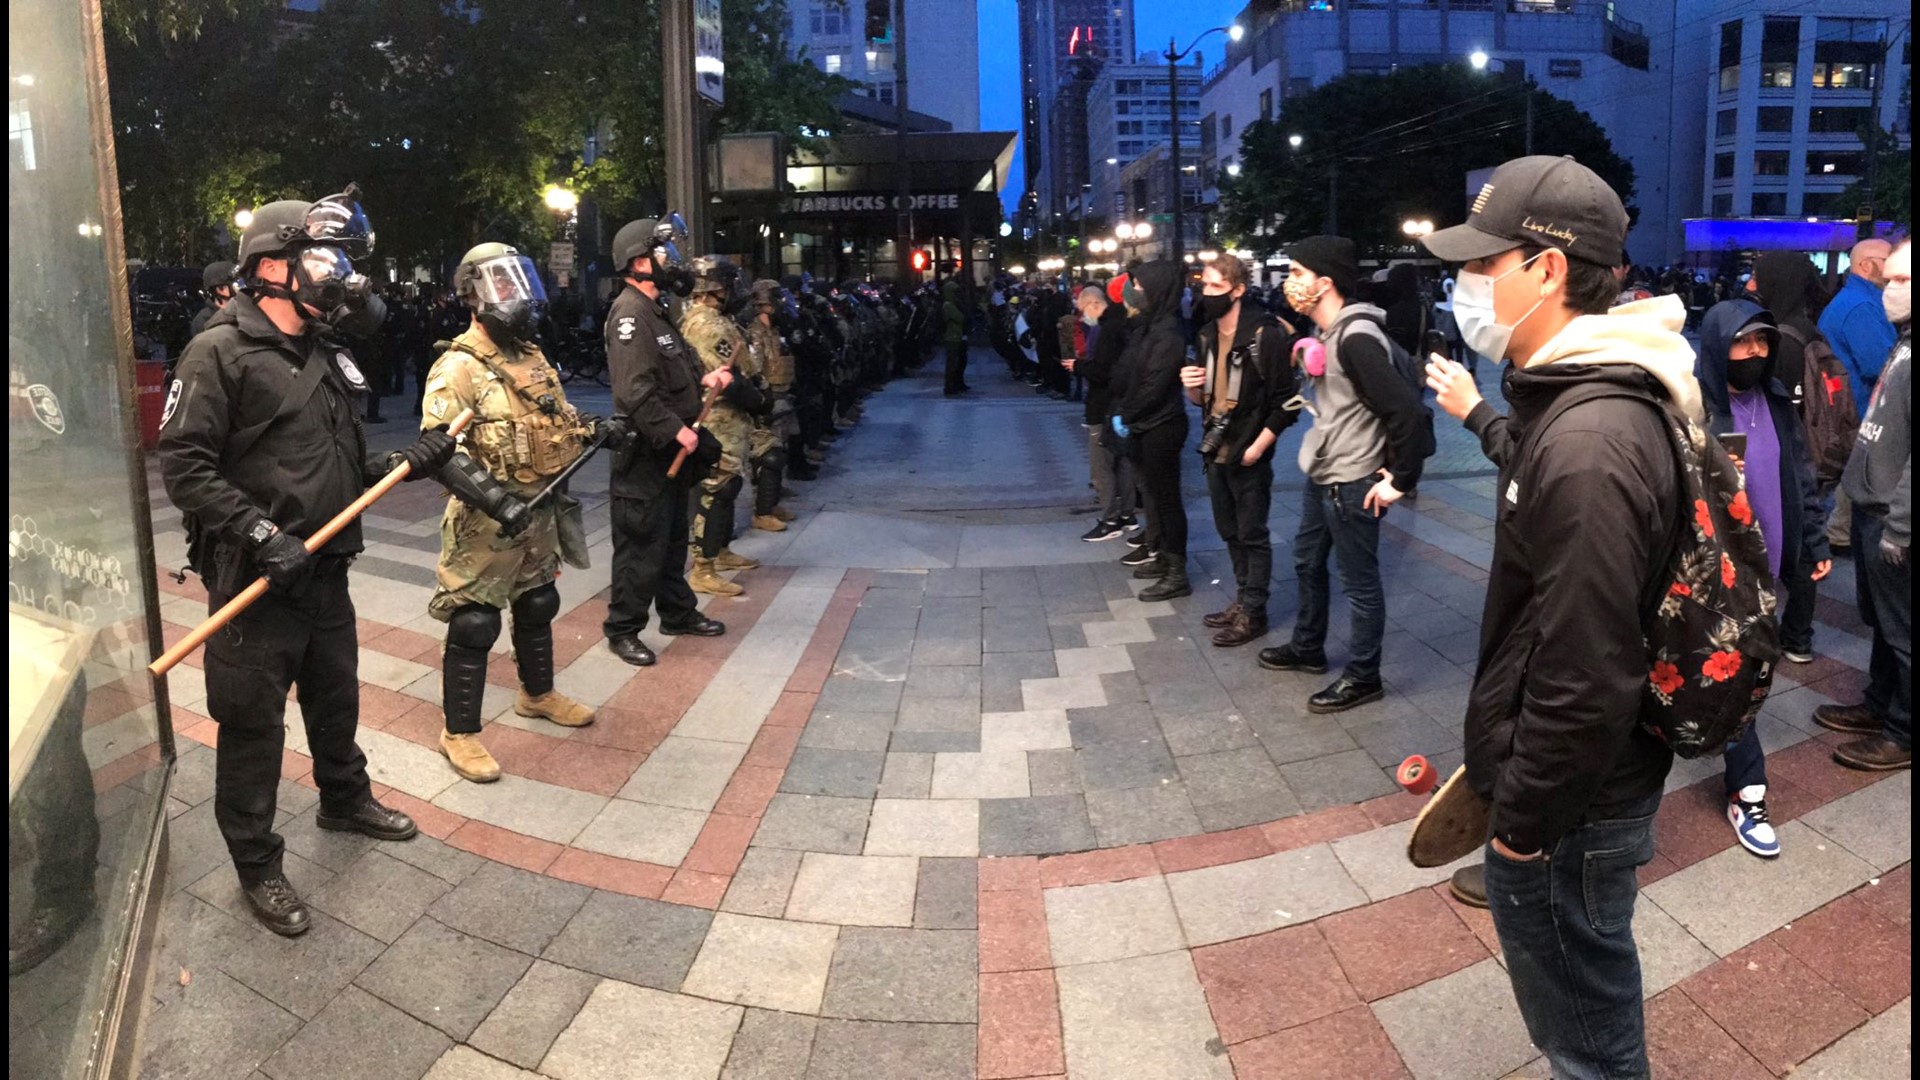 A year after approving police bonuses, some Seattle City Council members are open to decreasing police funding after mass protests against police violence.